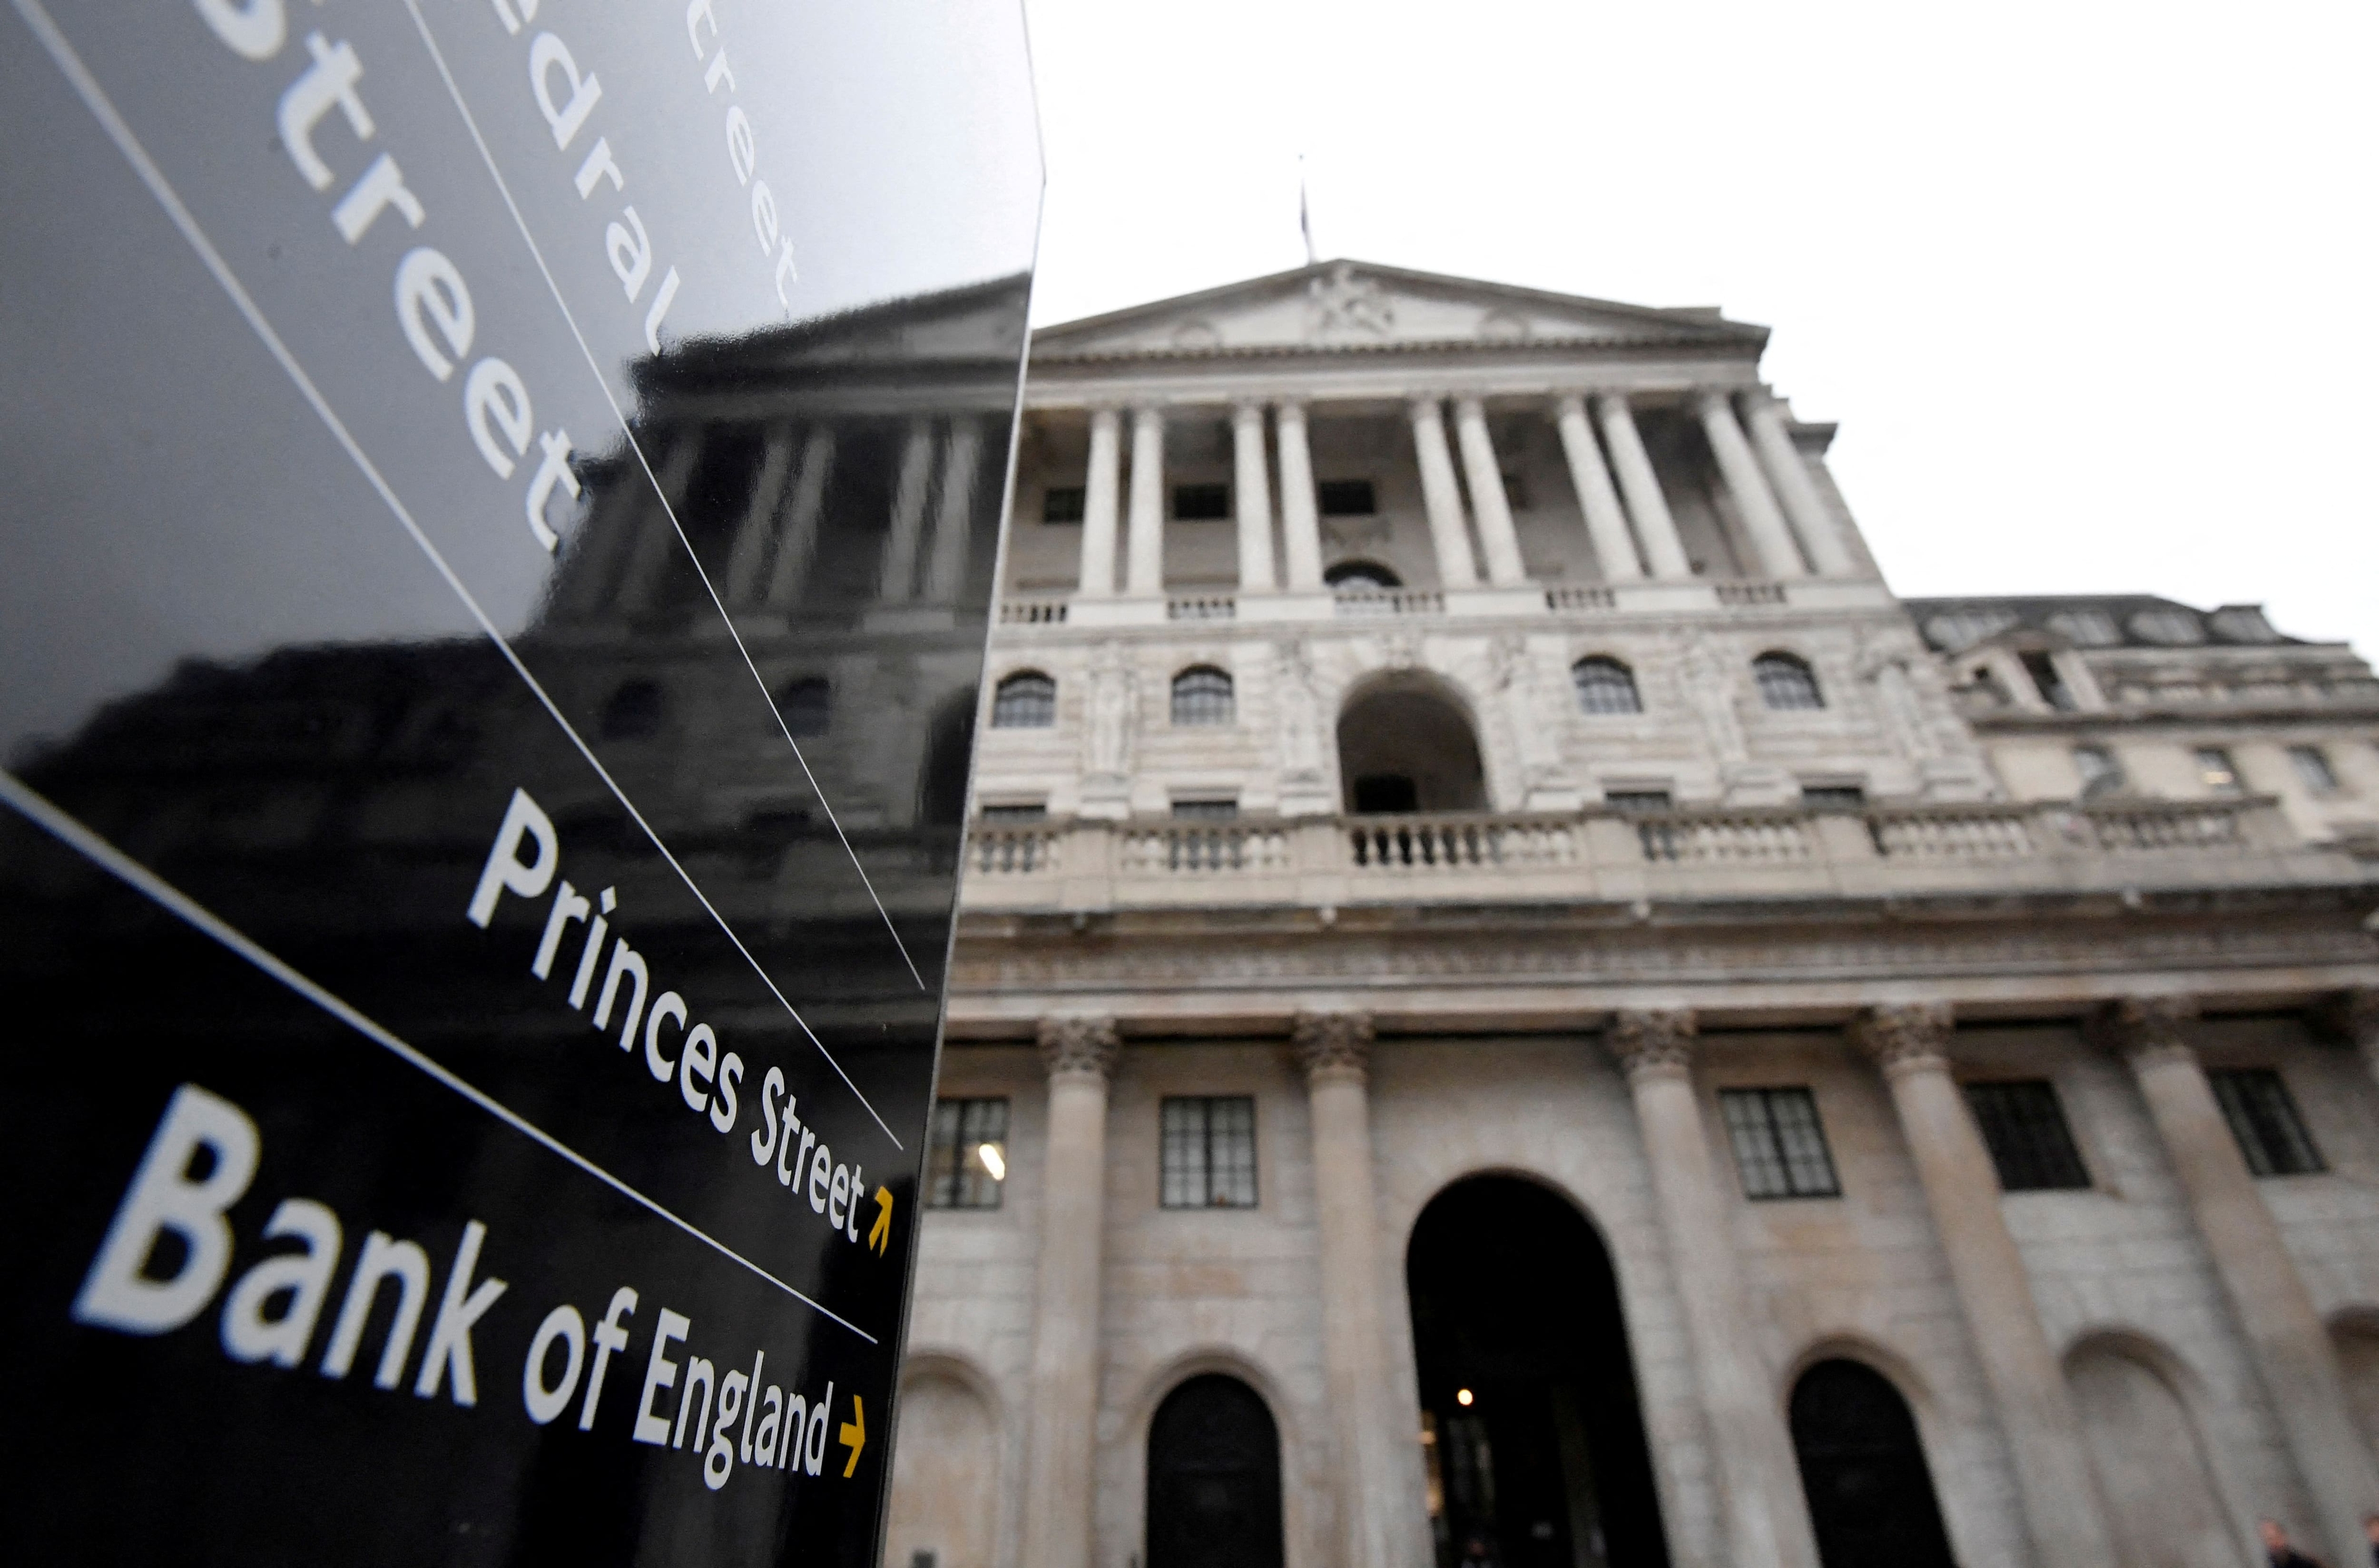 The Bank of England sent a stark warning that Britain risks a double-whammy of a recession and inflation above 10 percent as it raised interest rates on May 5 to their highest since 2009, hiking by quarter of a percentage point to 1 percent. The pound fell by more than a cent against the US dollar to hit its lowest level since mid-2020, below $1.24, as the gloominess of the BoE's new forecasts for the world's fifth-largest economy caught investors by surprise.